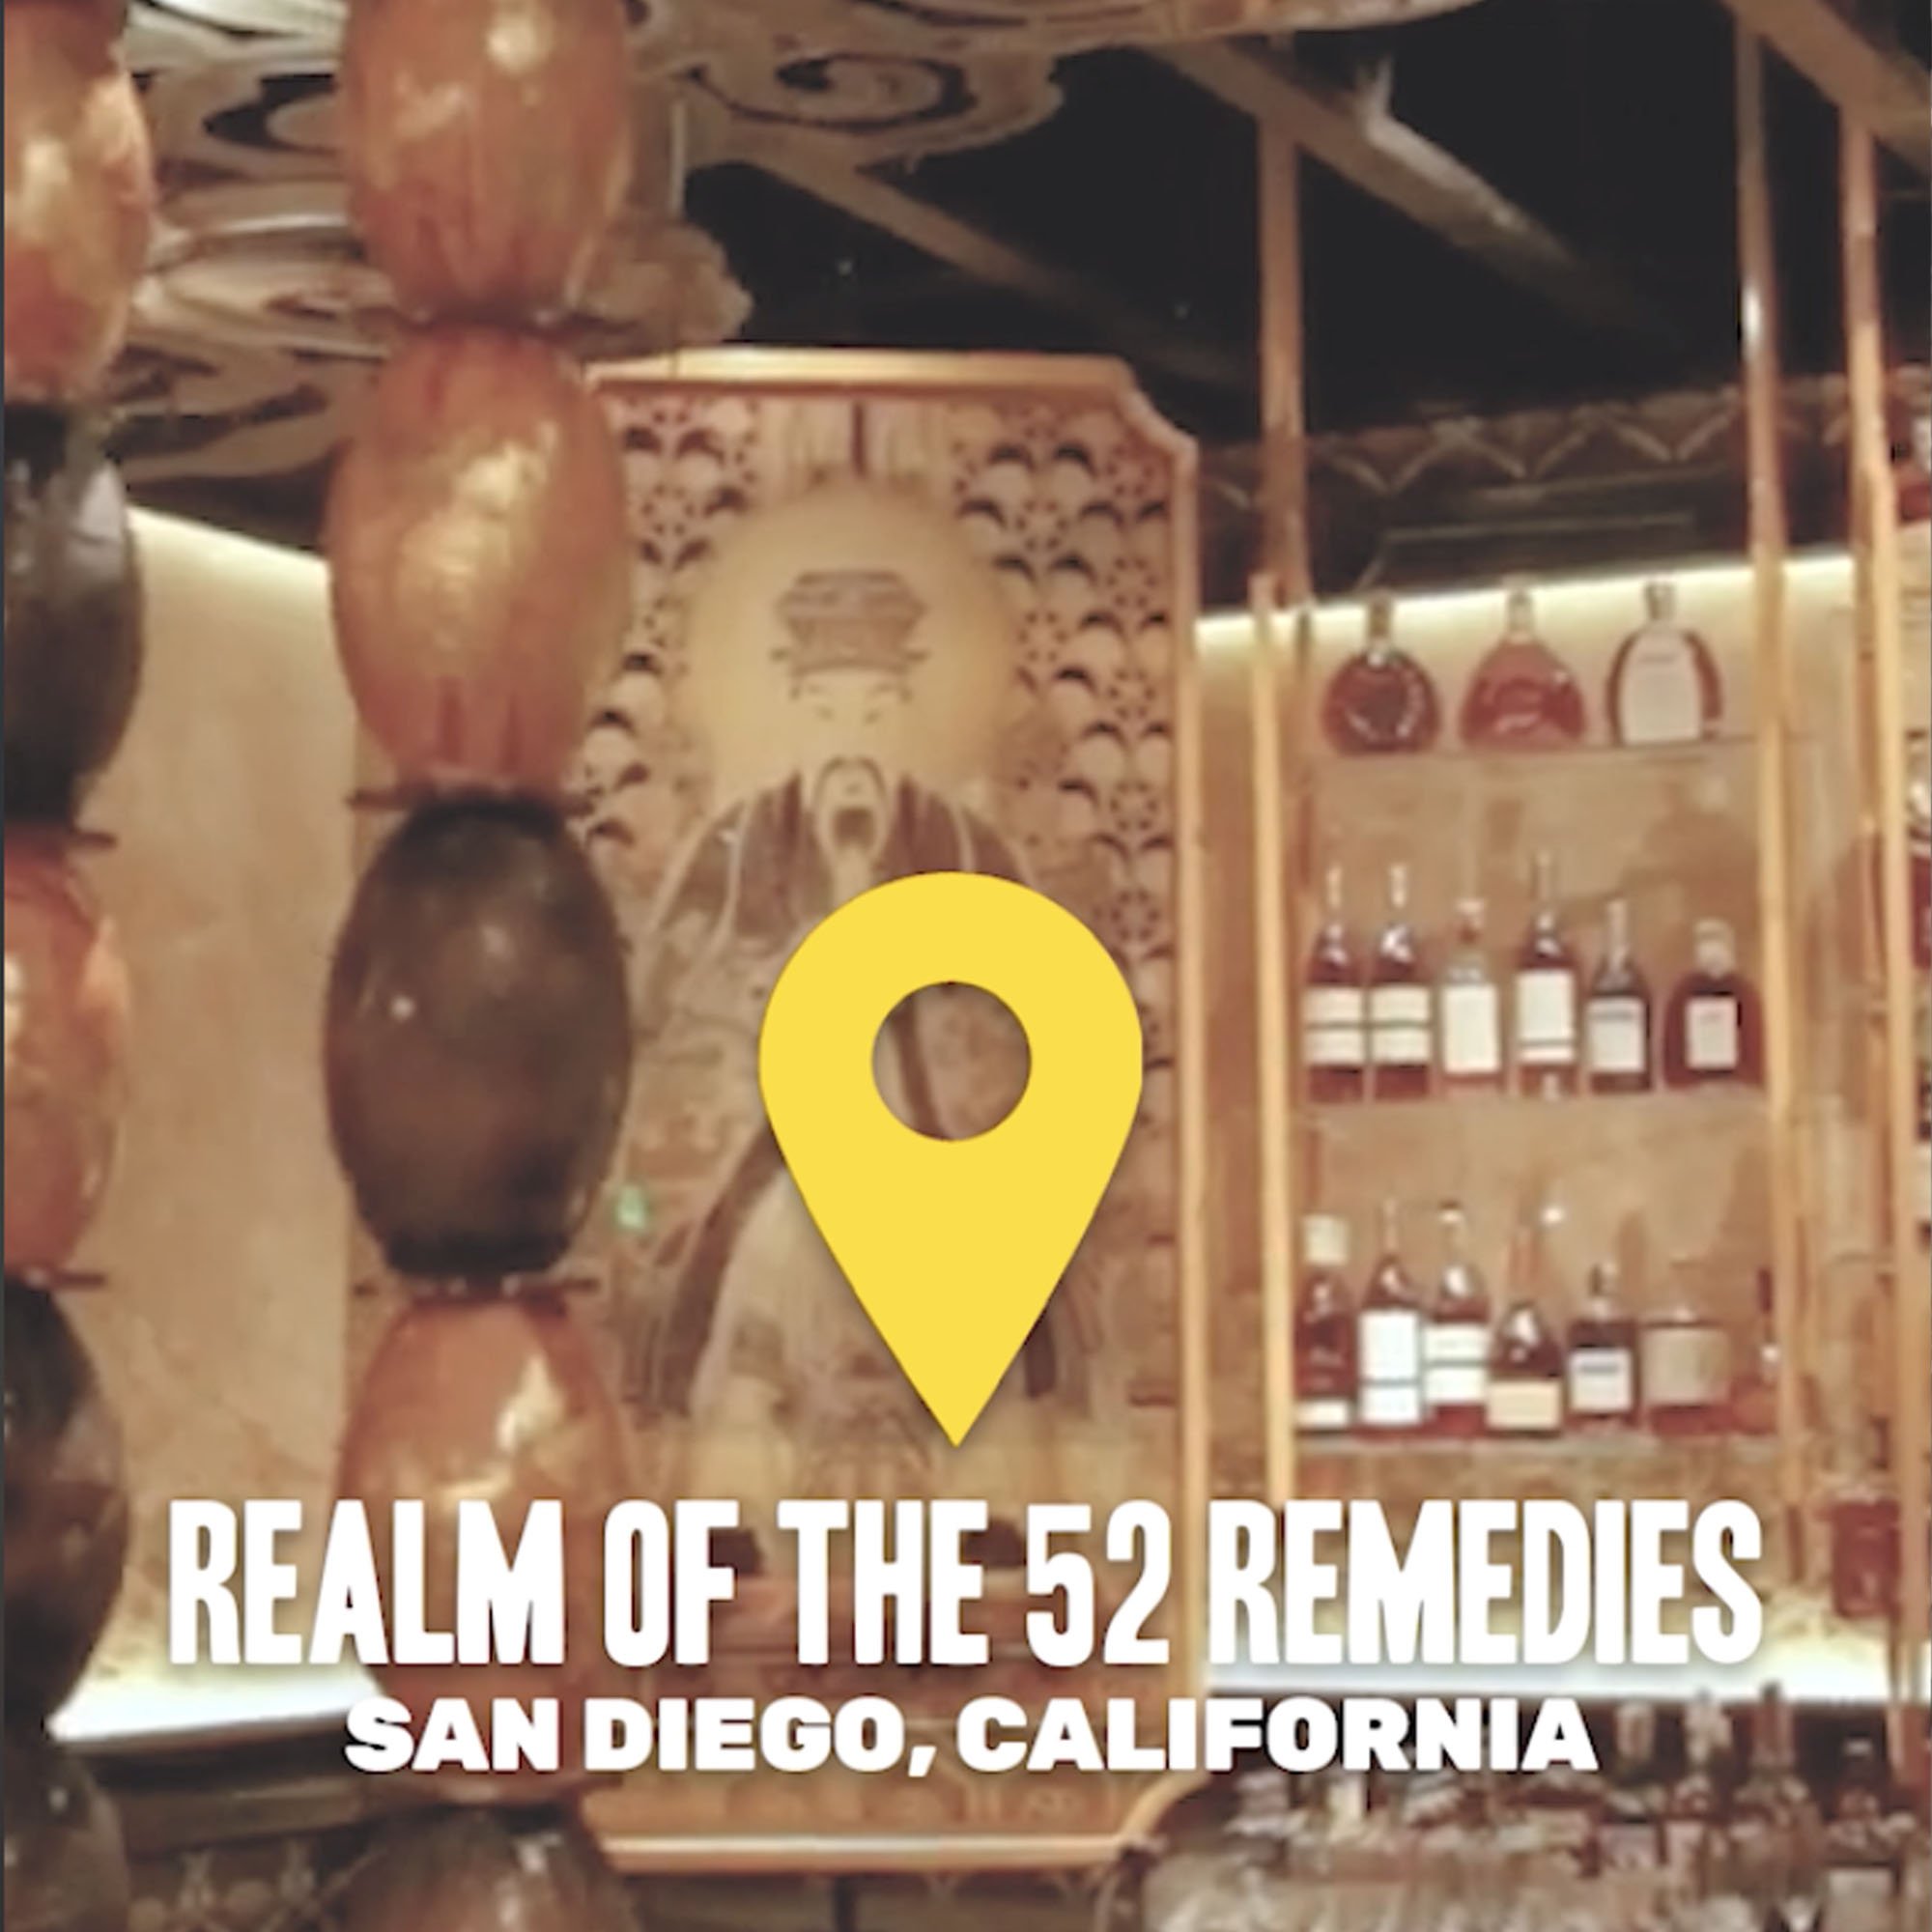 Realm of the 52 Remedies